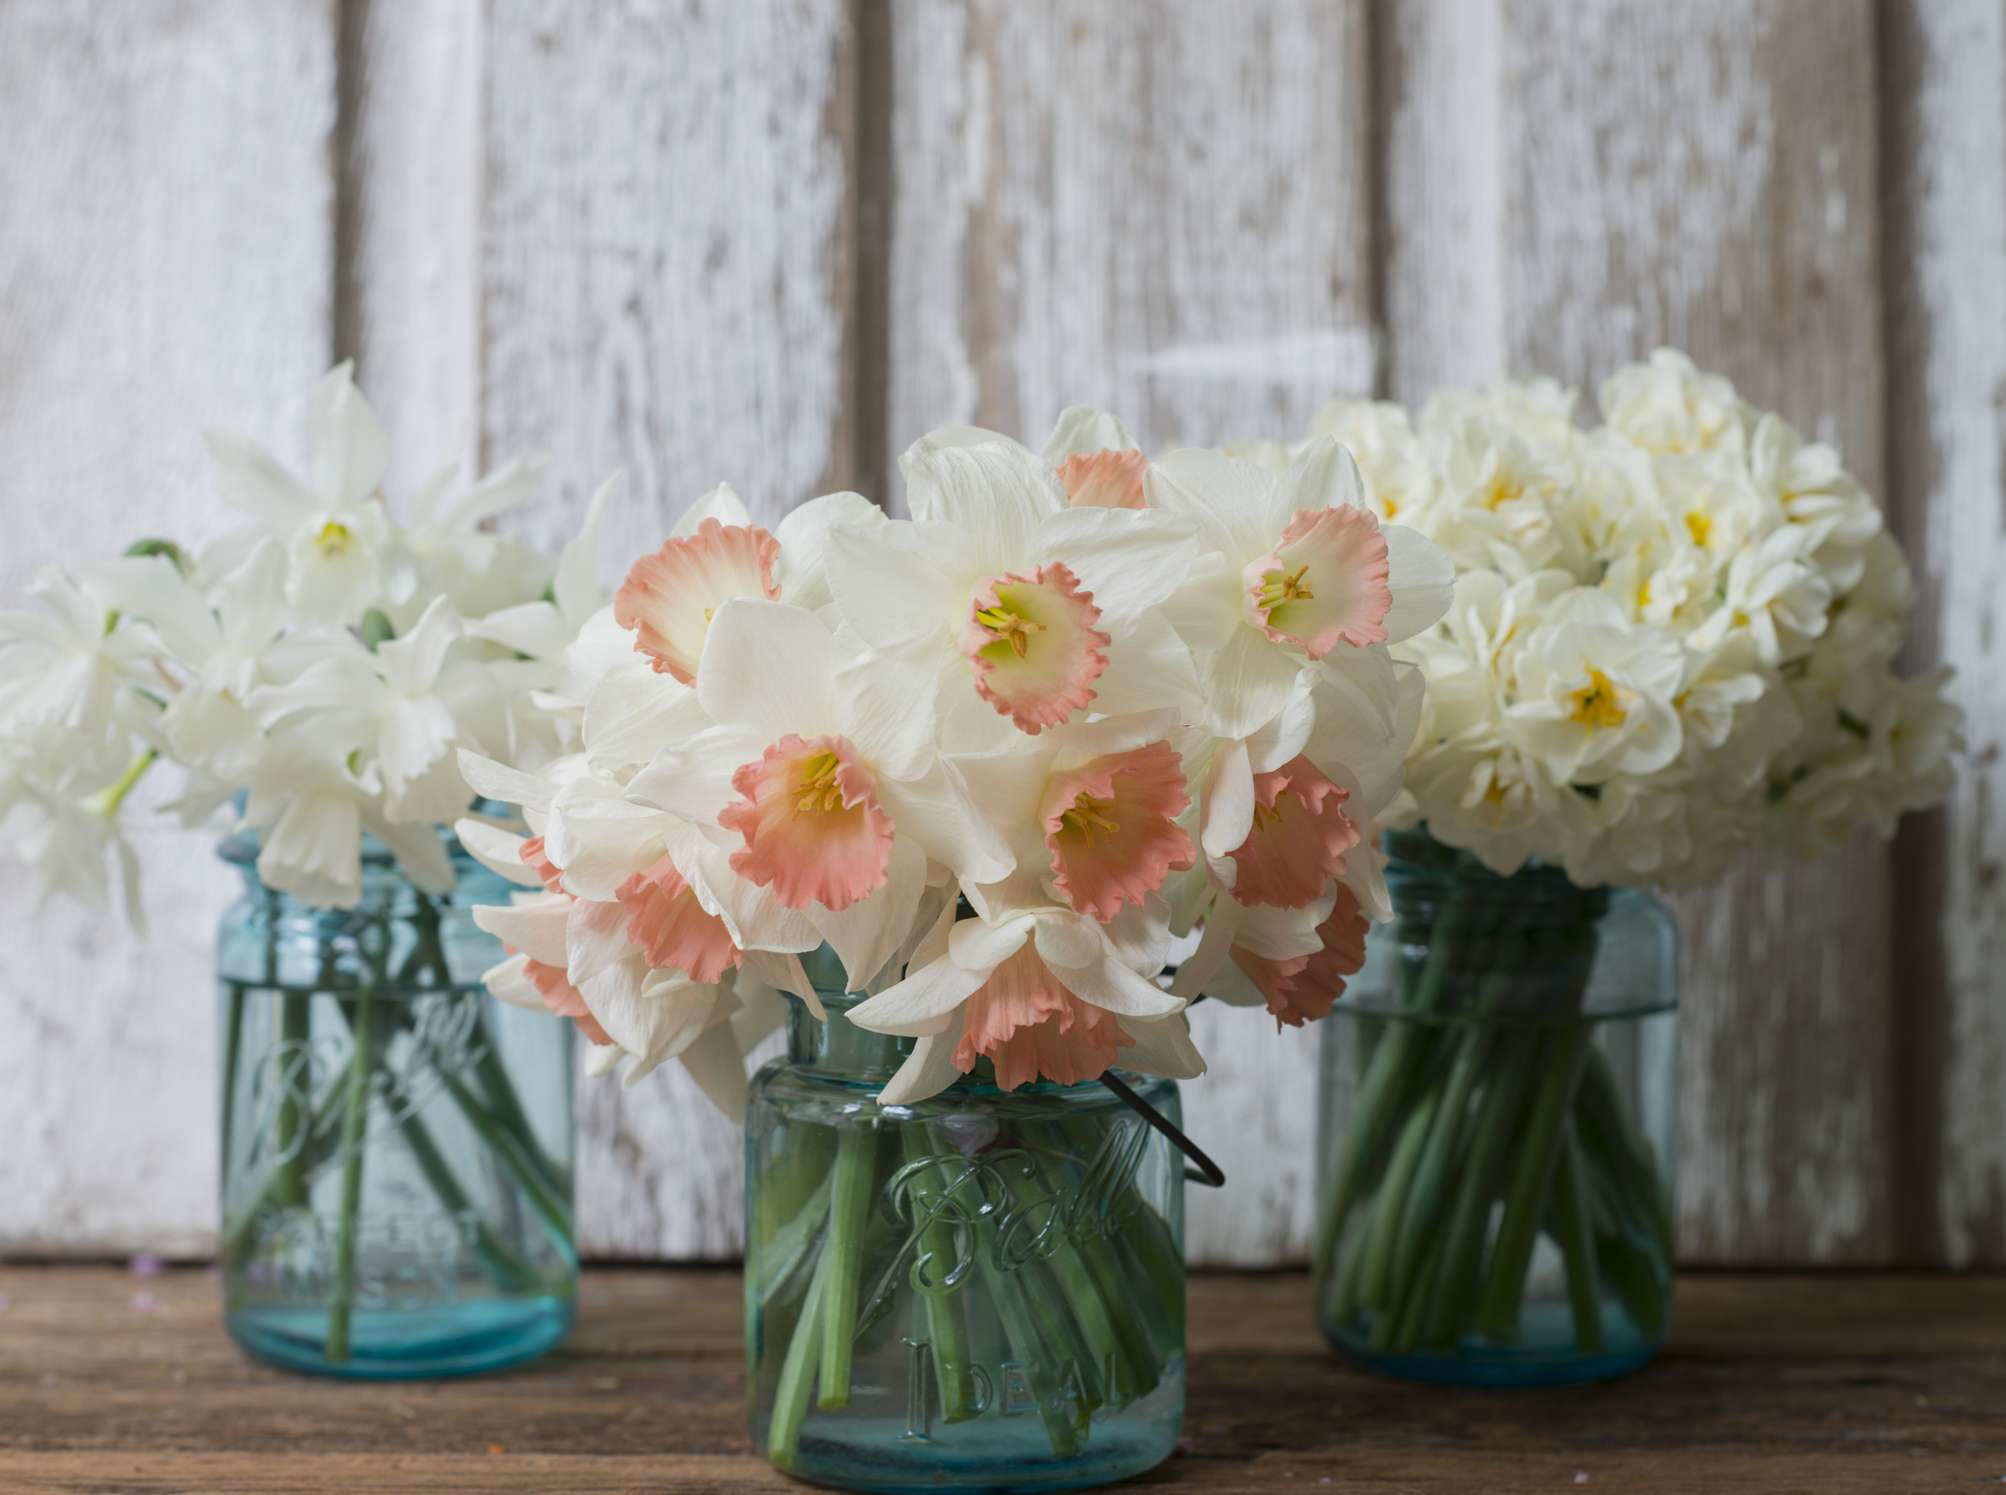 27 Great Antique Hyacinth Vases for Sale 2023 free download antique hyacinth vases for sale of the best spring wedding flowers regarding daffodil bouquets